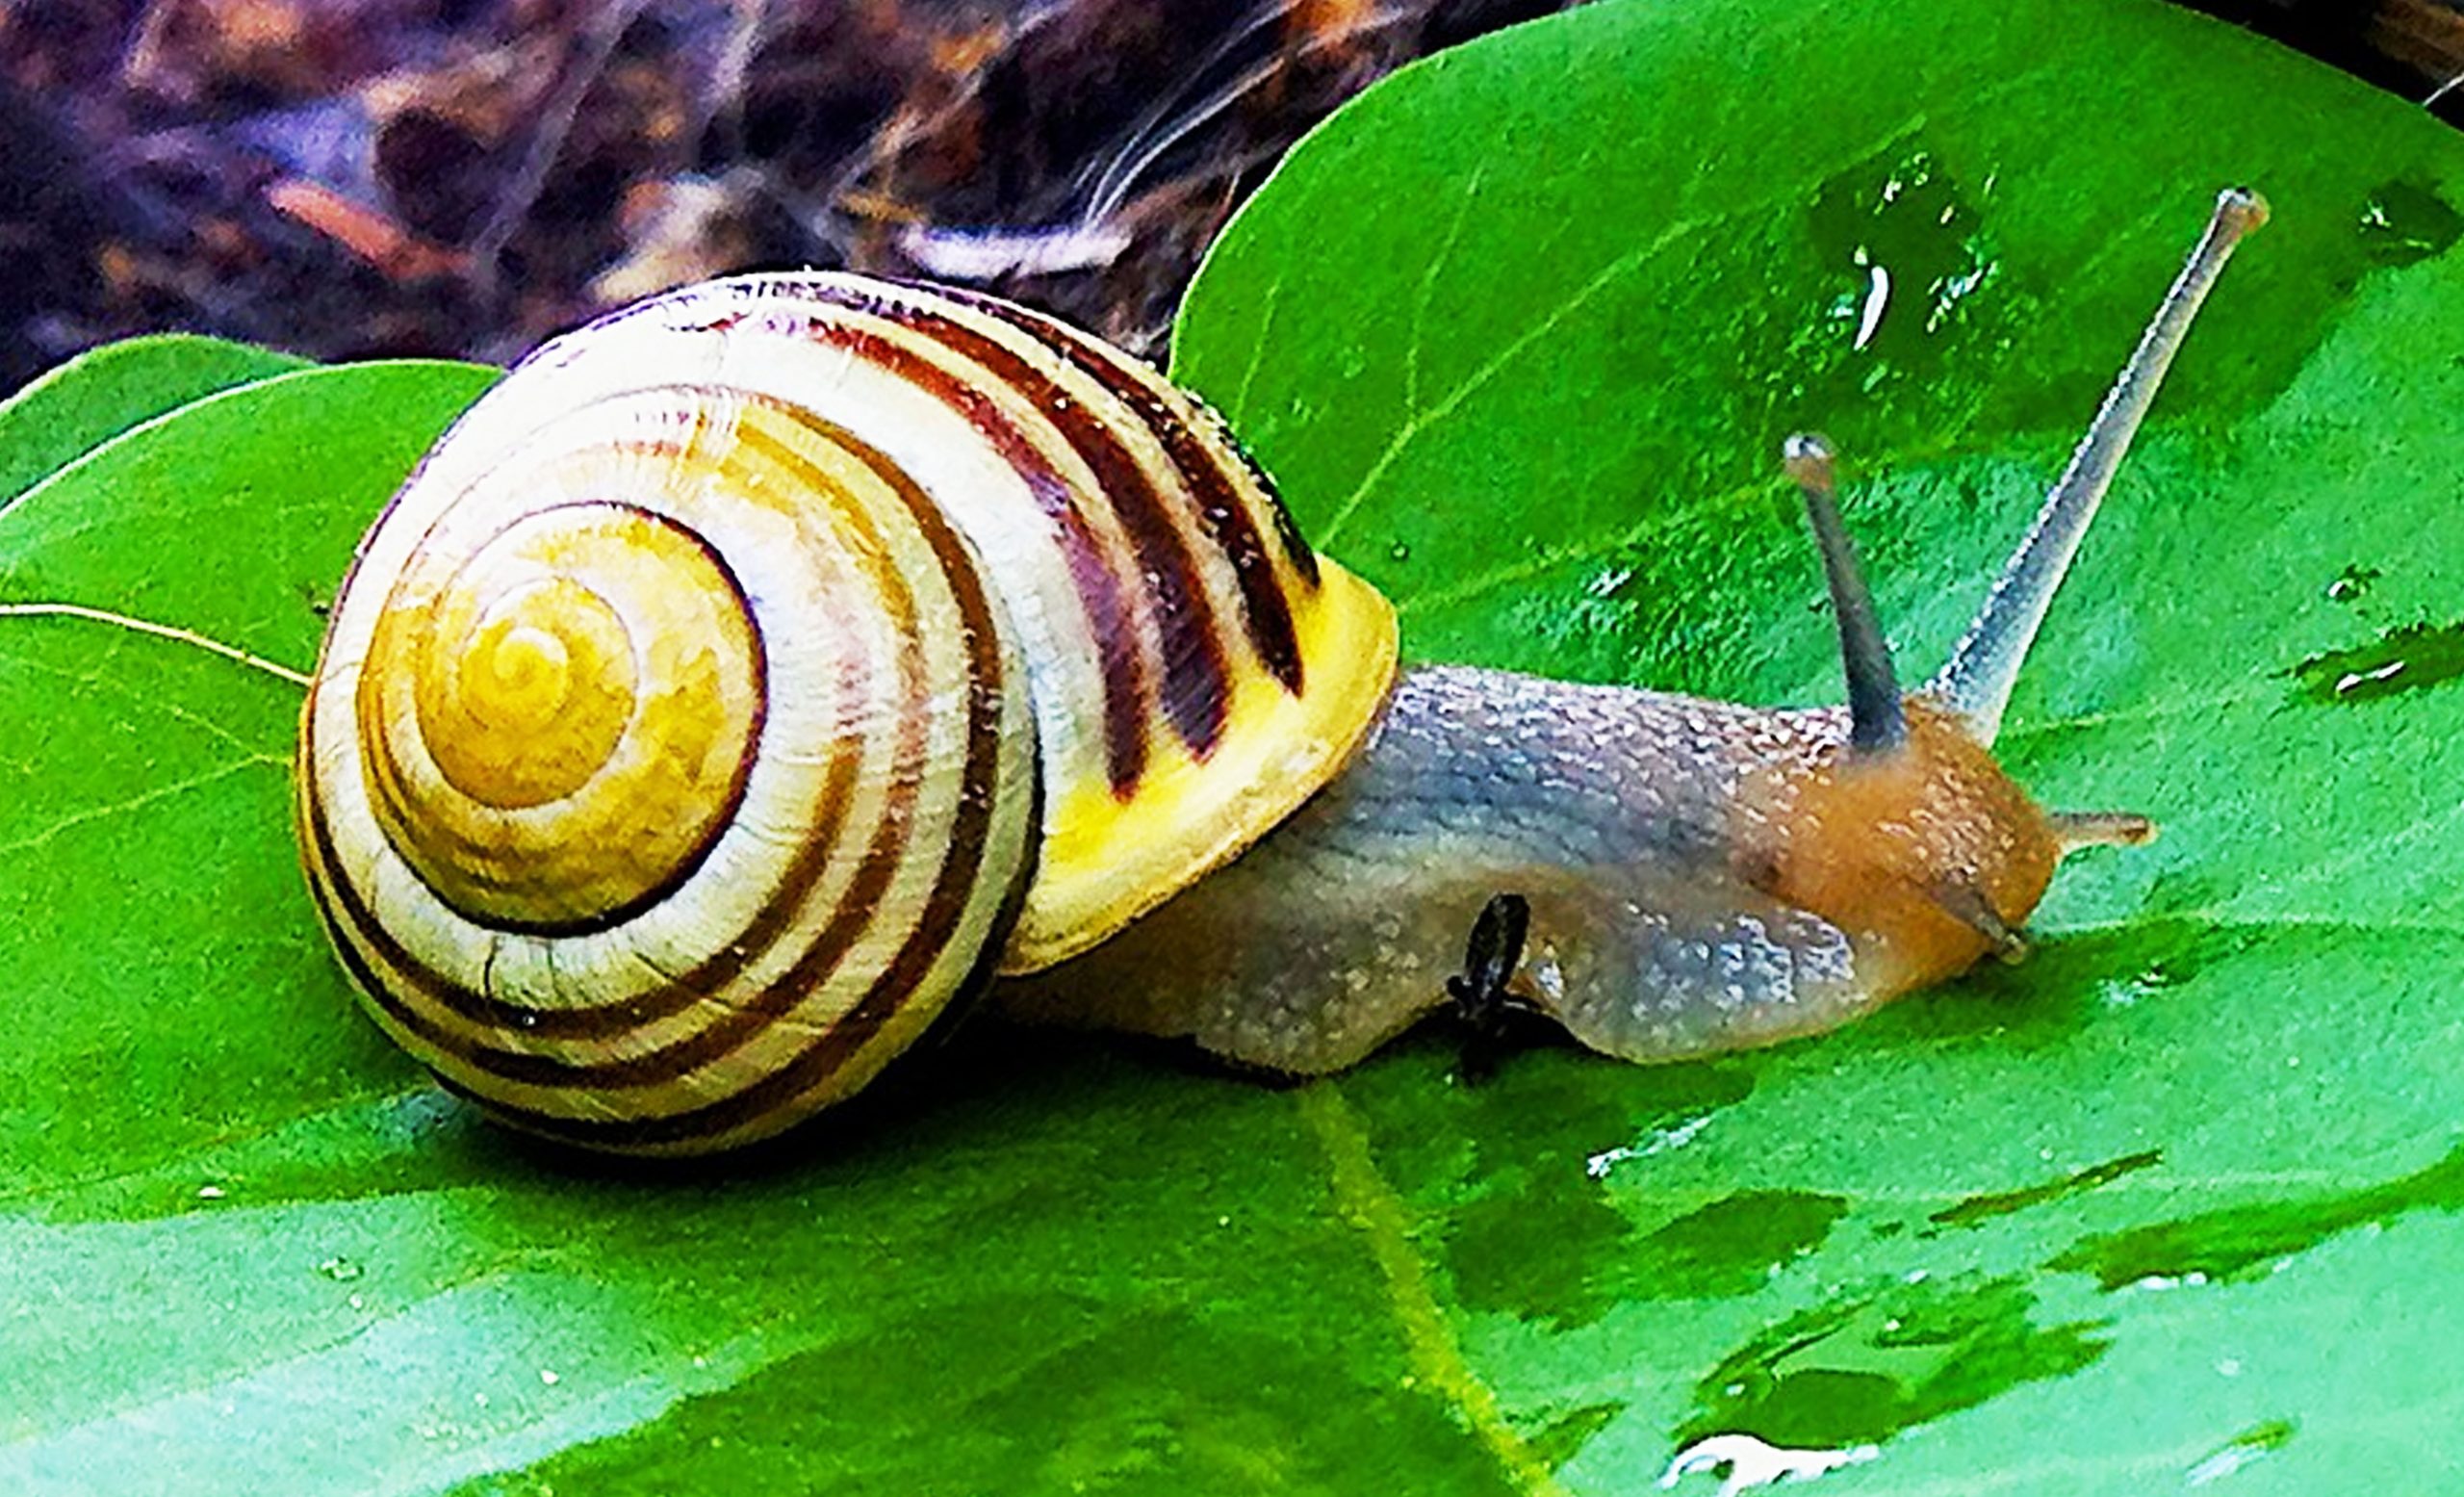 Snail Facts